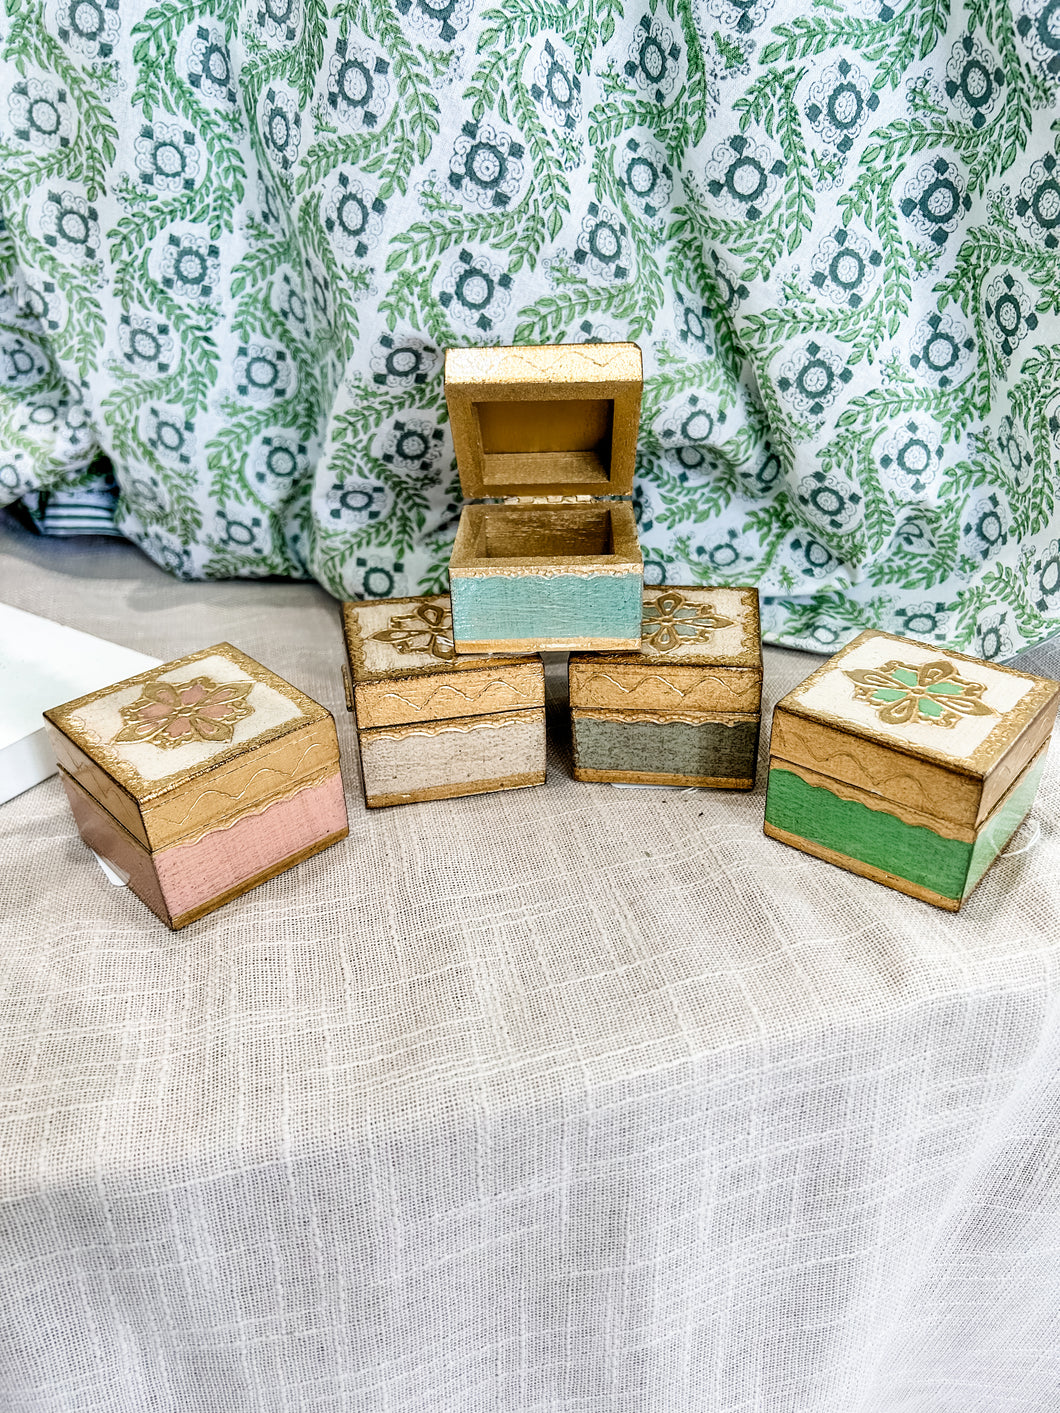 Florentine Carved Mini Wood Box with Lid, Ring Box